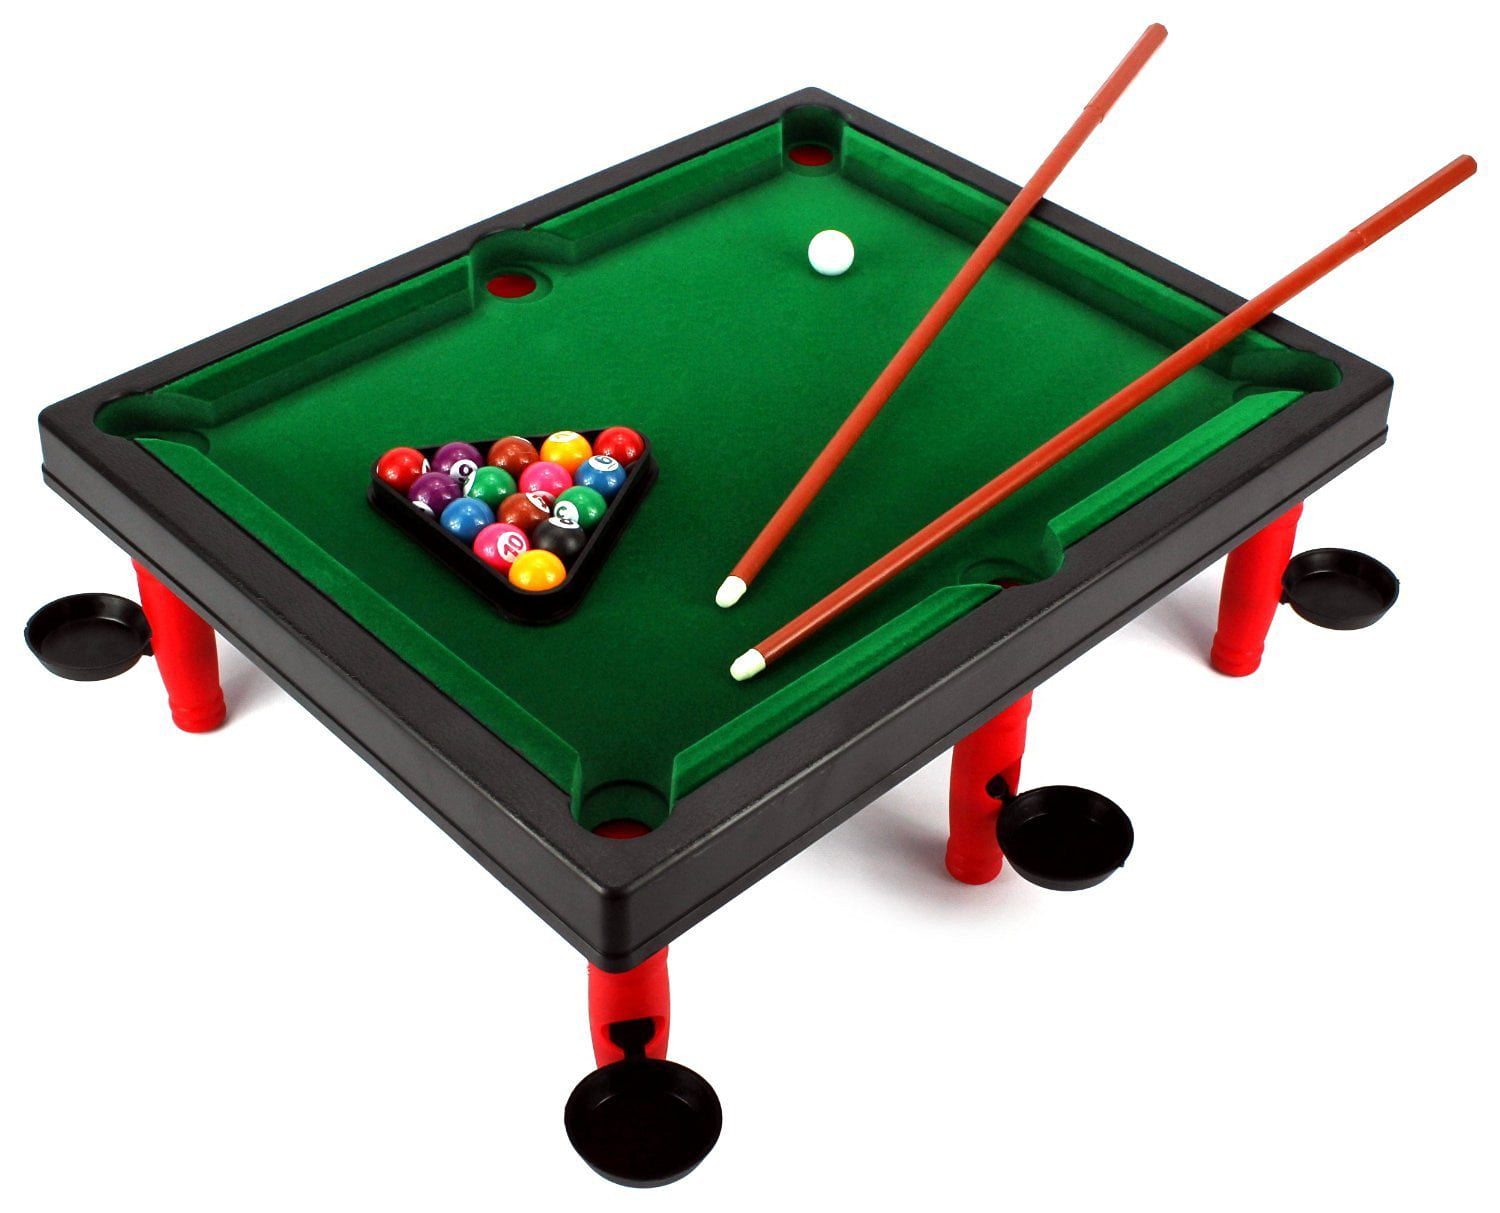 Tabletop Table Pool d002